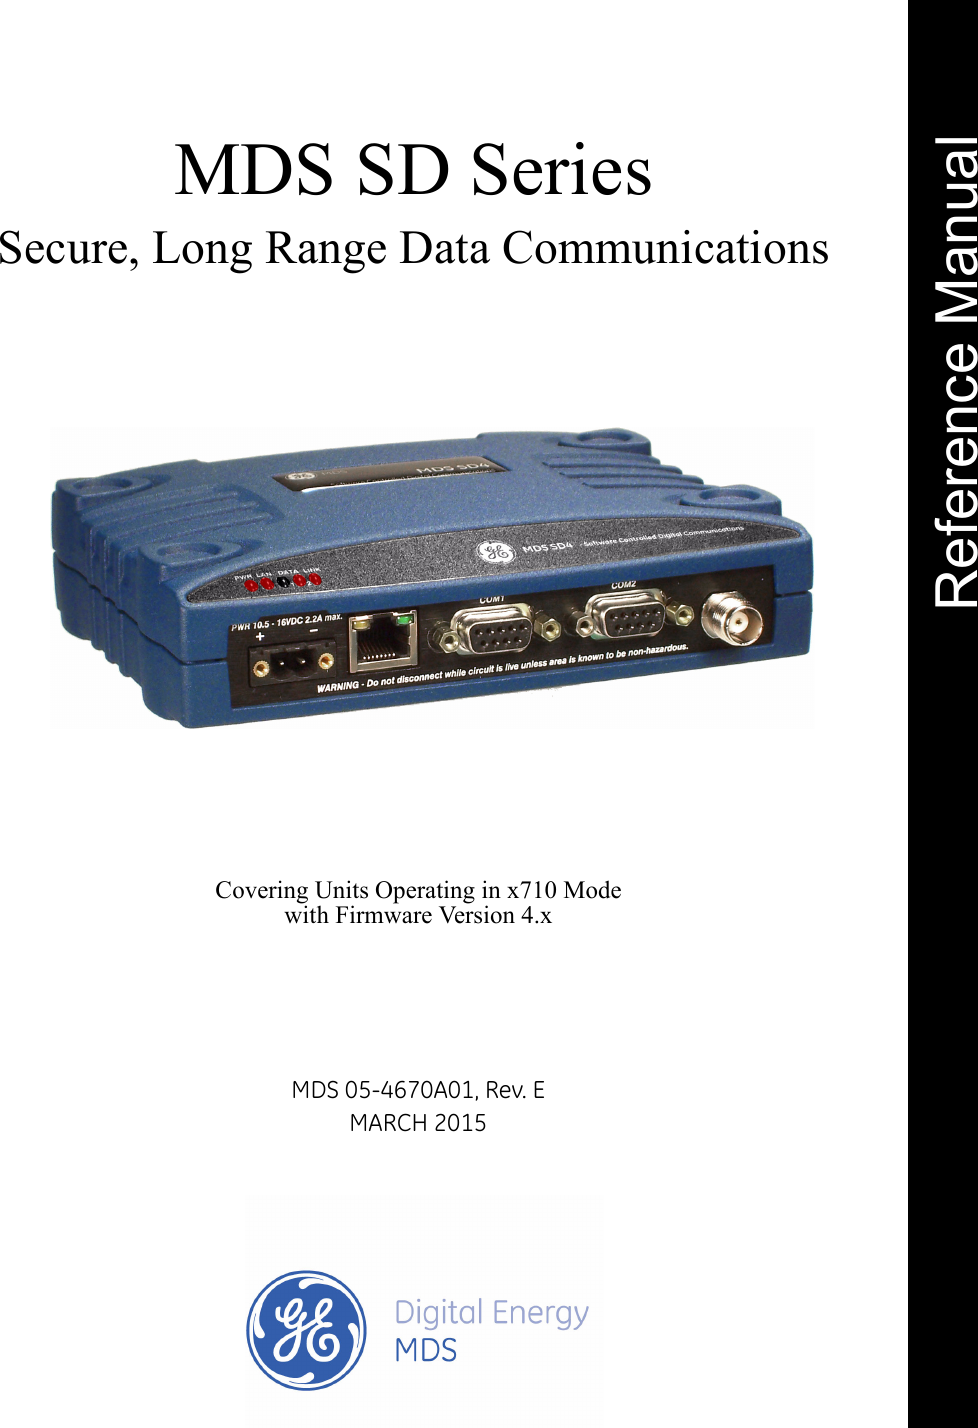 Installation and Operation GuideReference ManualMDS 05-4670A01, Rev. EMARCH 2015Covering Units Operating in x710 Modewith Firmware Version 4.xMDS SD SeriesSecure, Long Range Data Communications